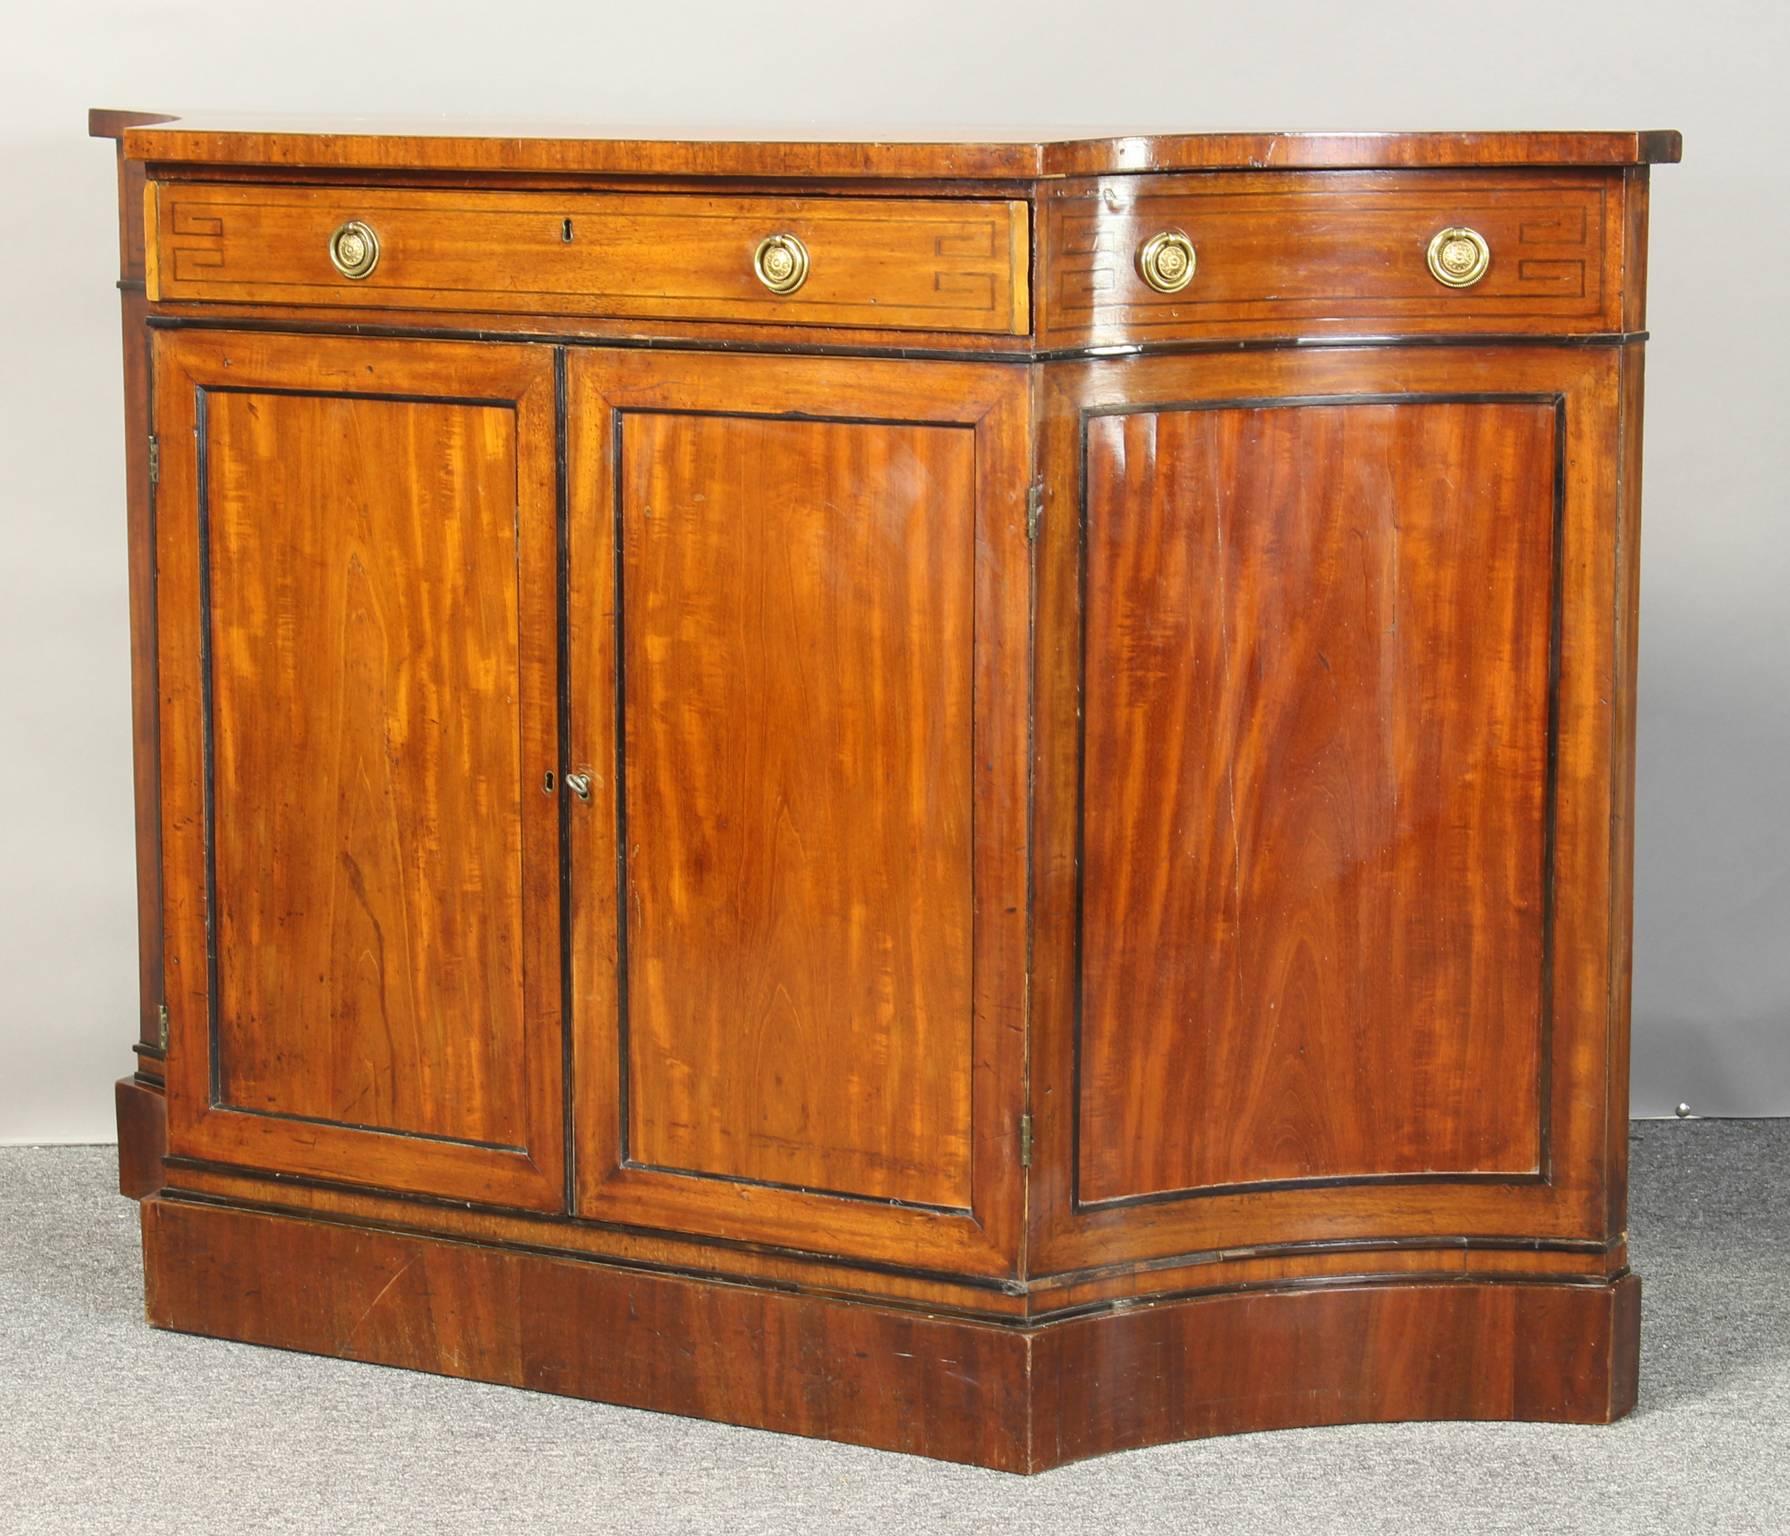 A small and elegant early 19th century Regency credenza with ebony stringing and original gilt brass pulls.